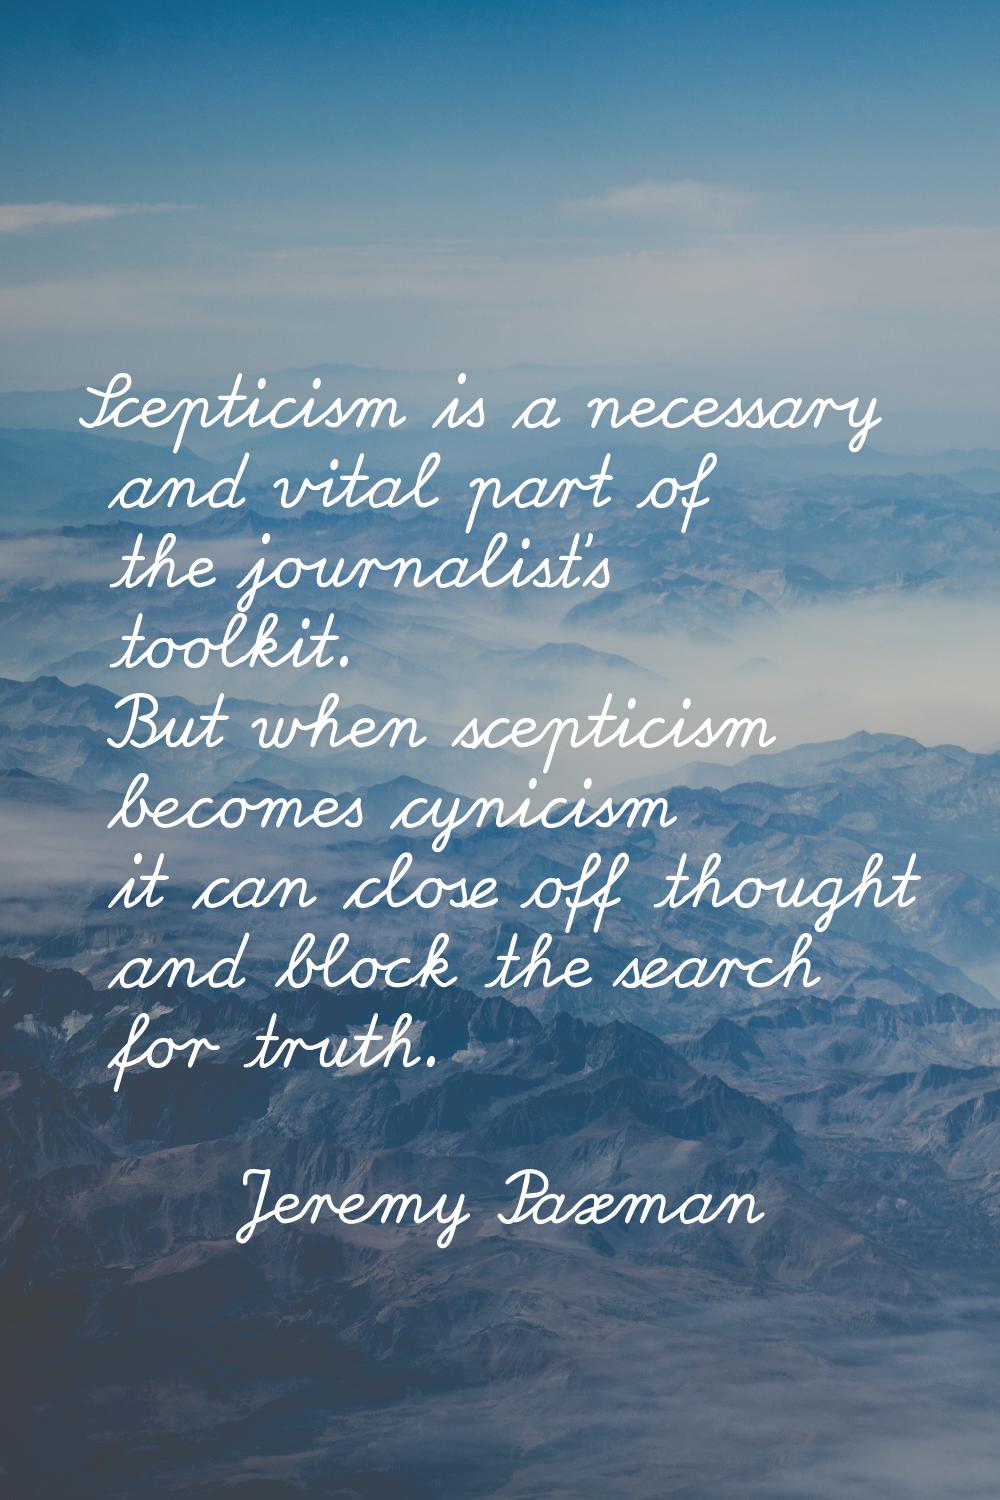 Scepticism is a necessary and vital part of the journalist's toolkit. But when scepticism becomes c